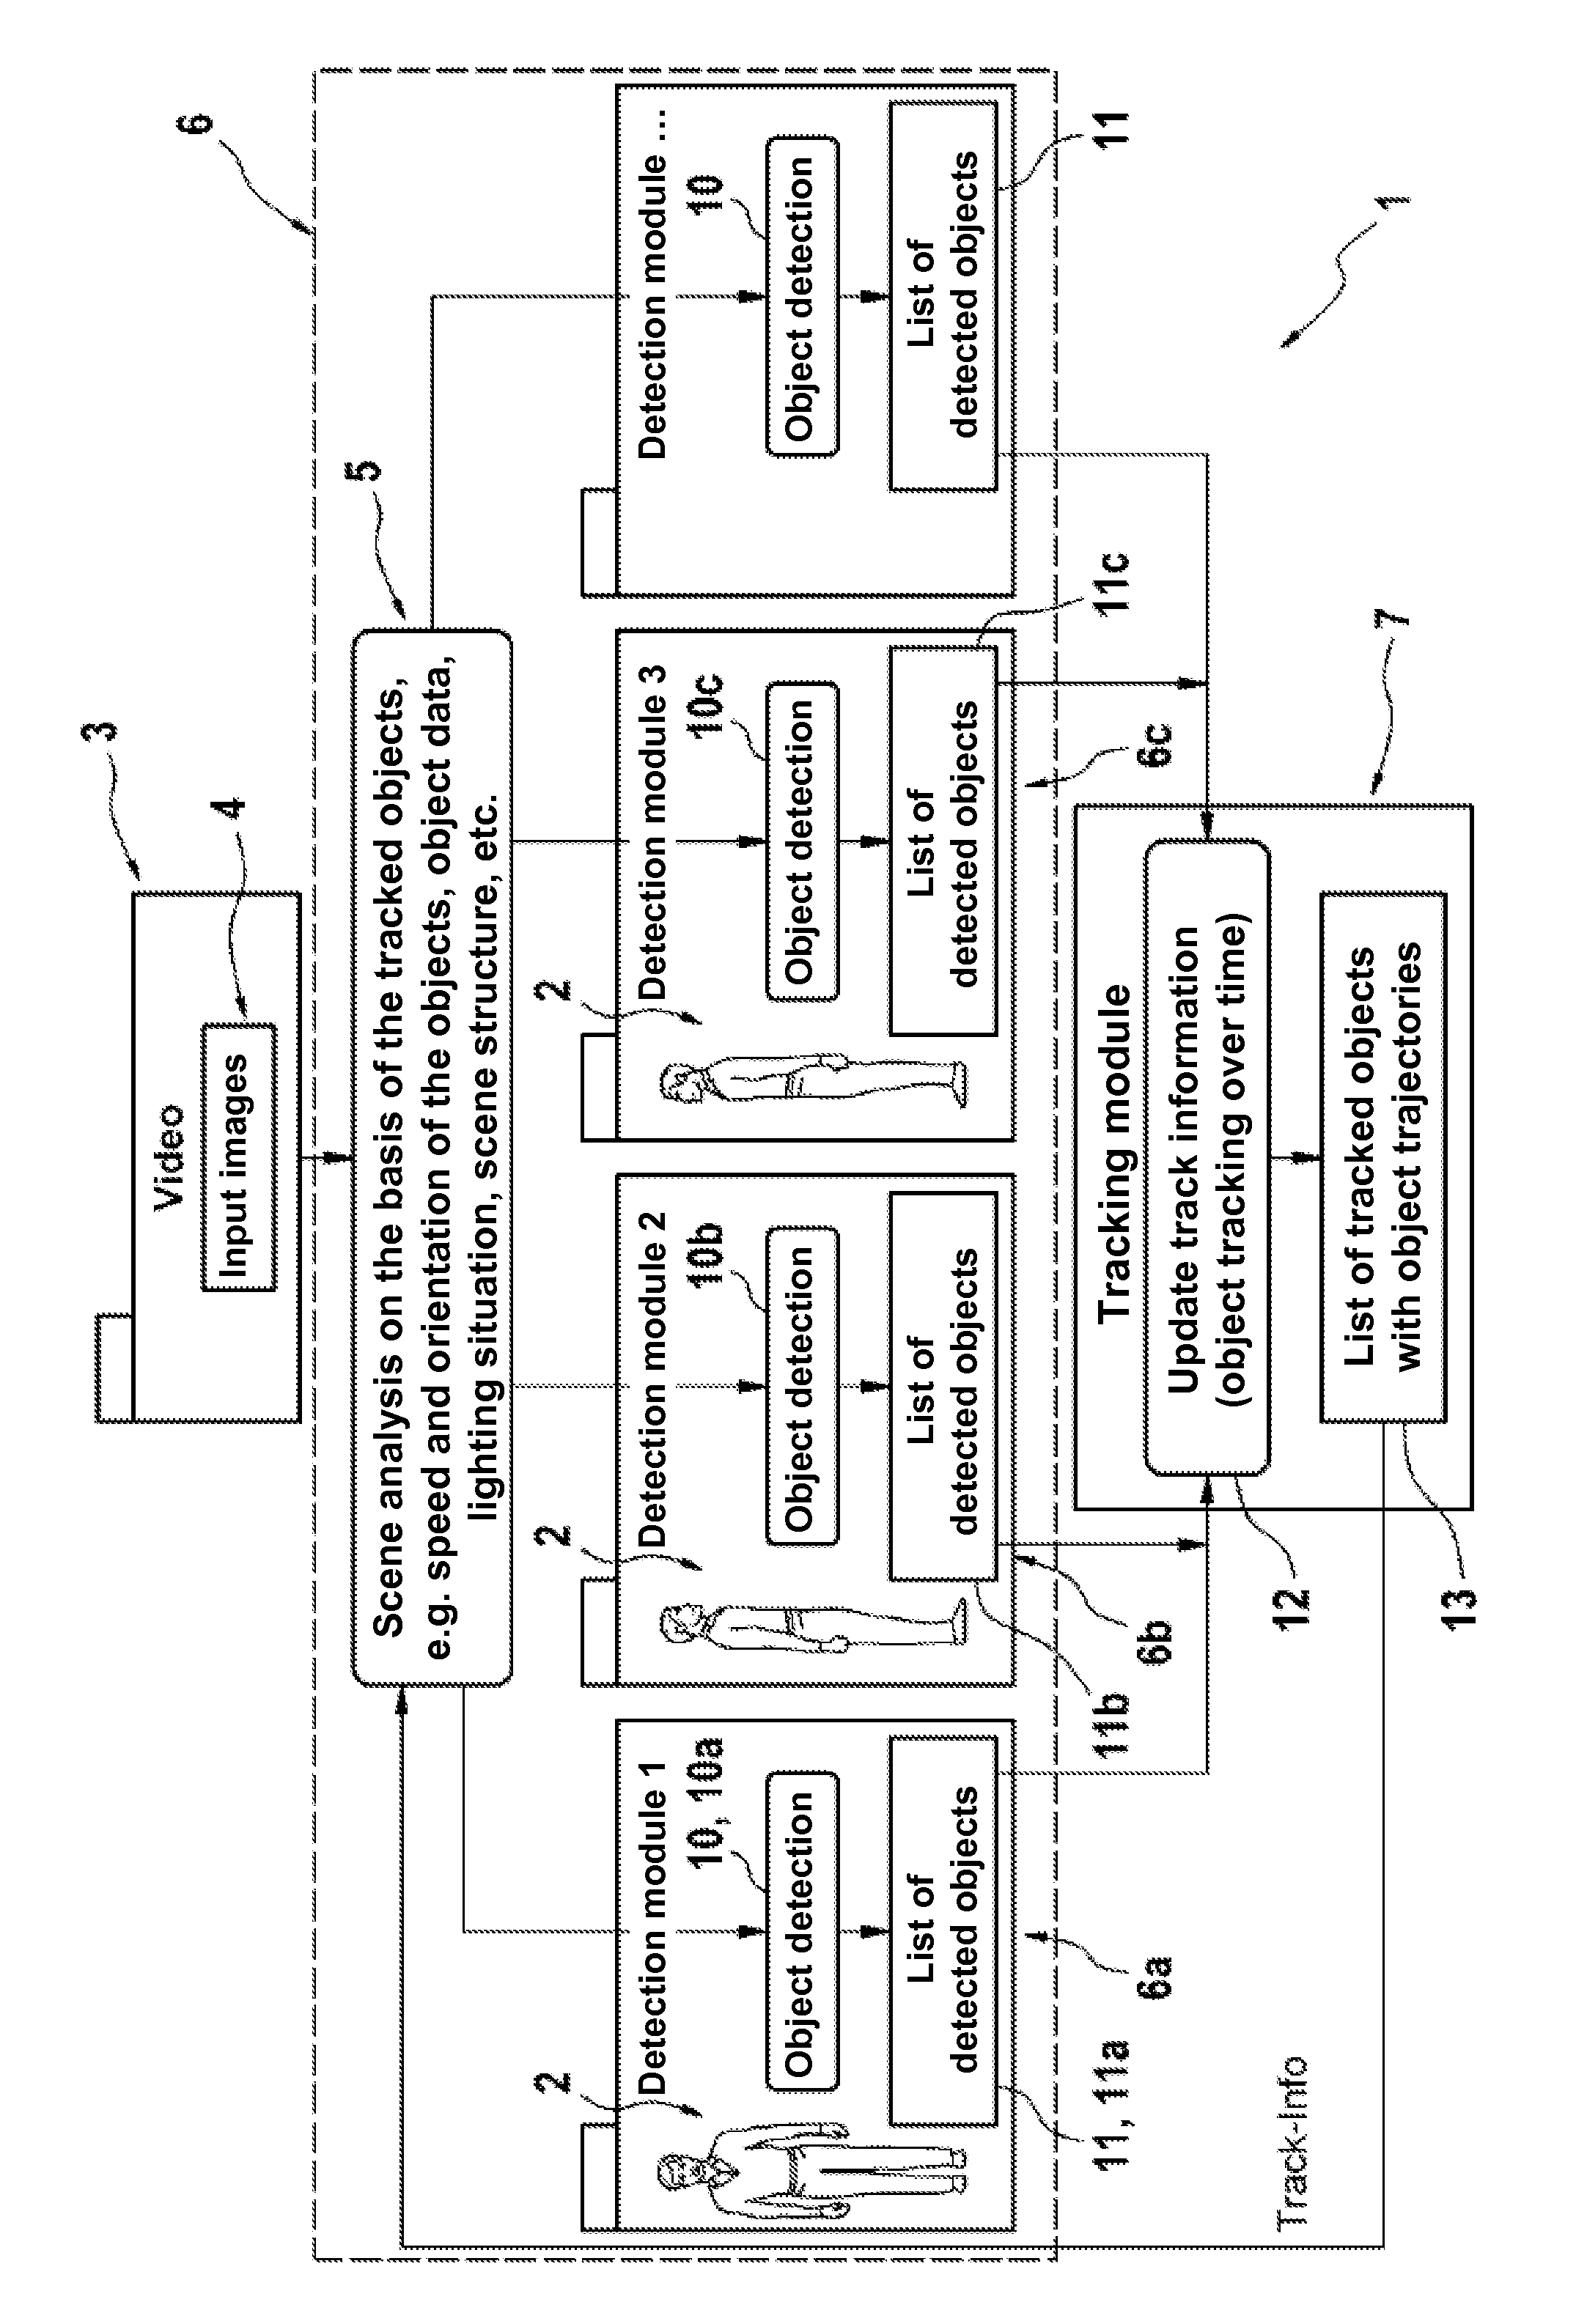 Device and method for monitoring video objects